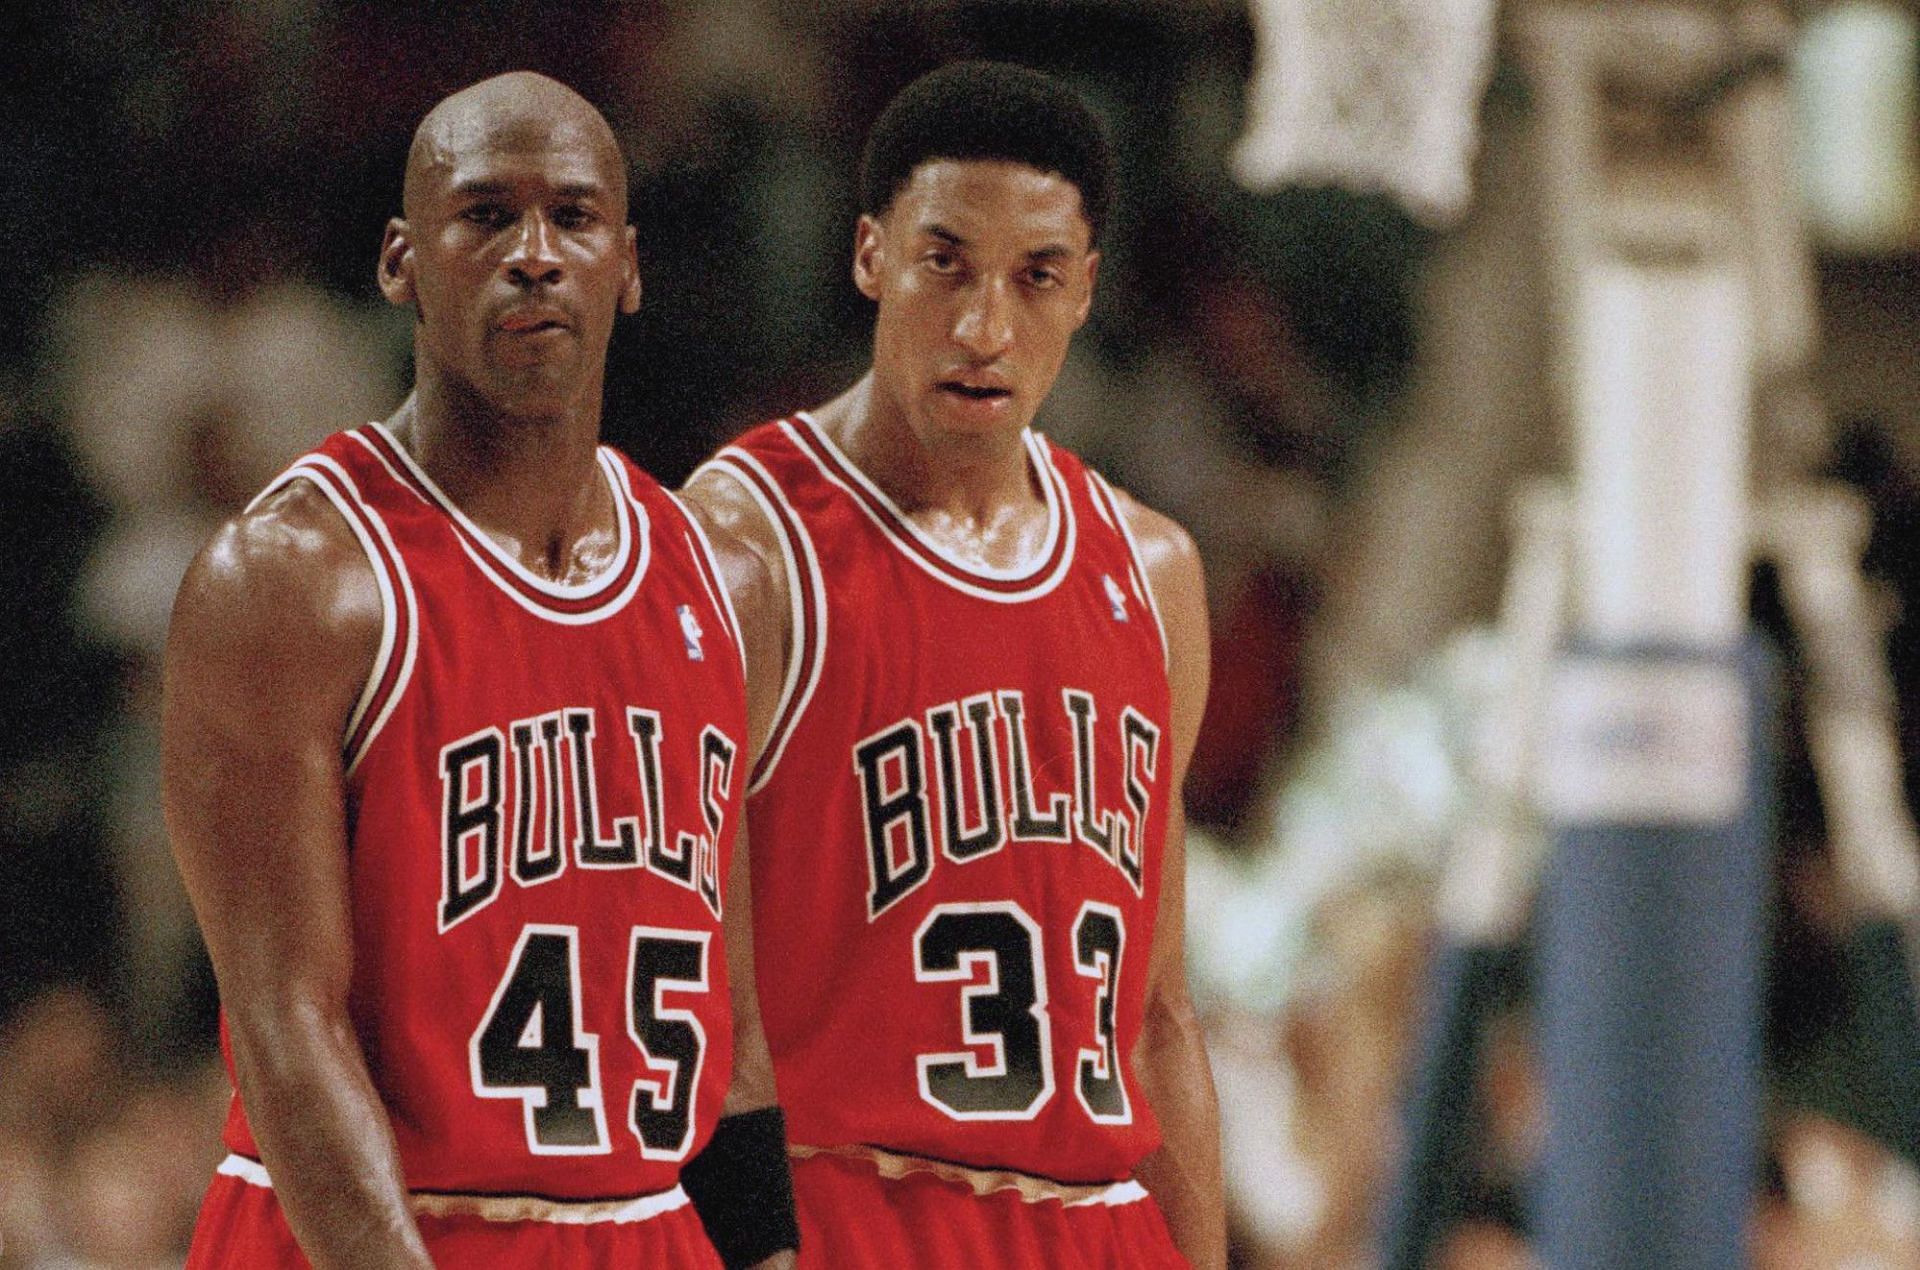 Michael Jordan and Scottie Pippen during their time together with the Chicago Bulls